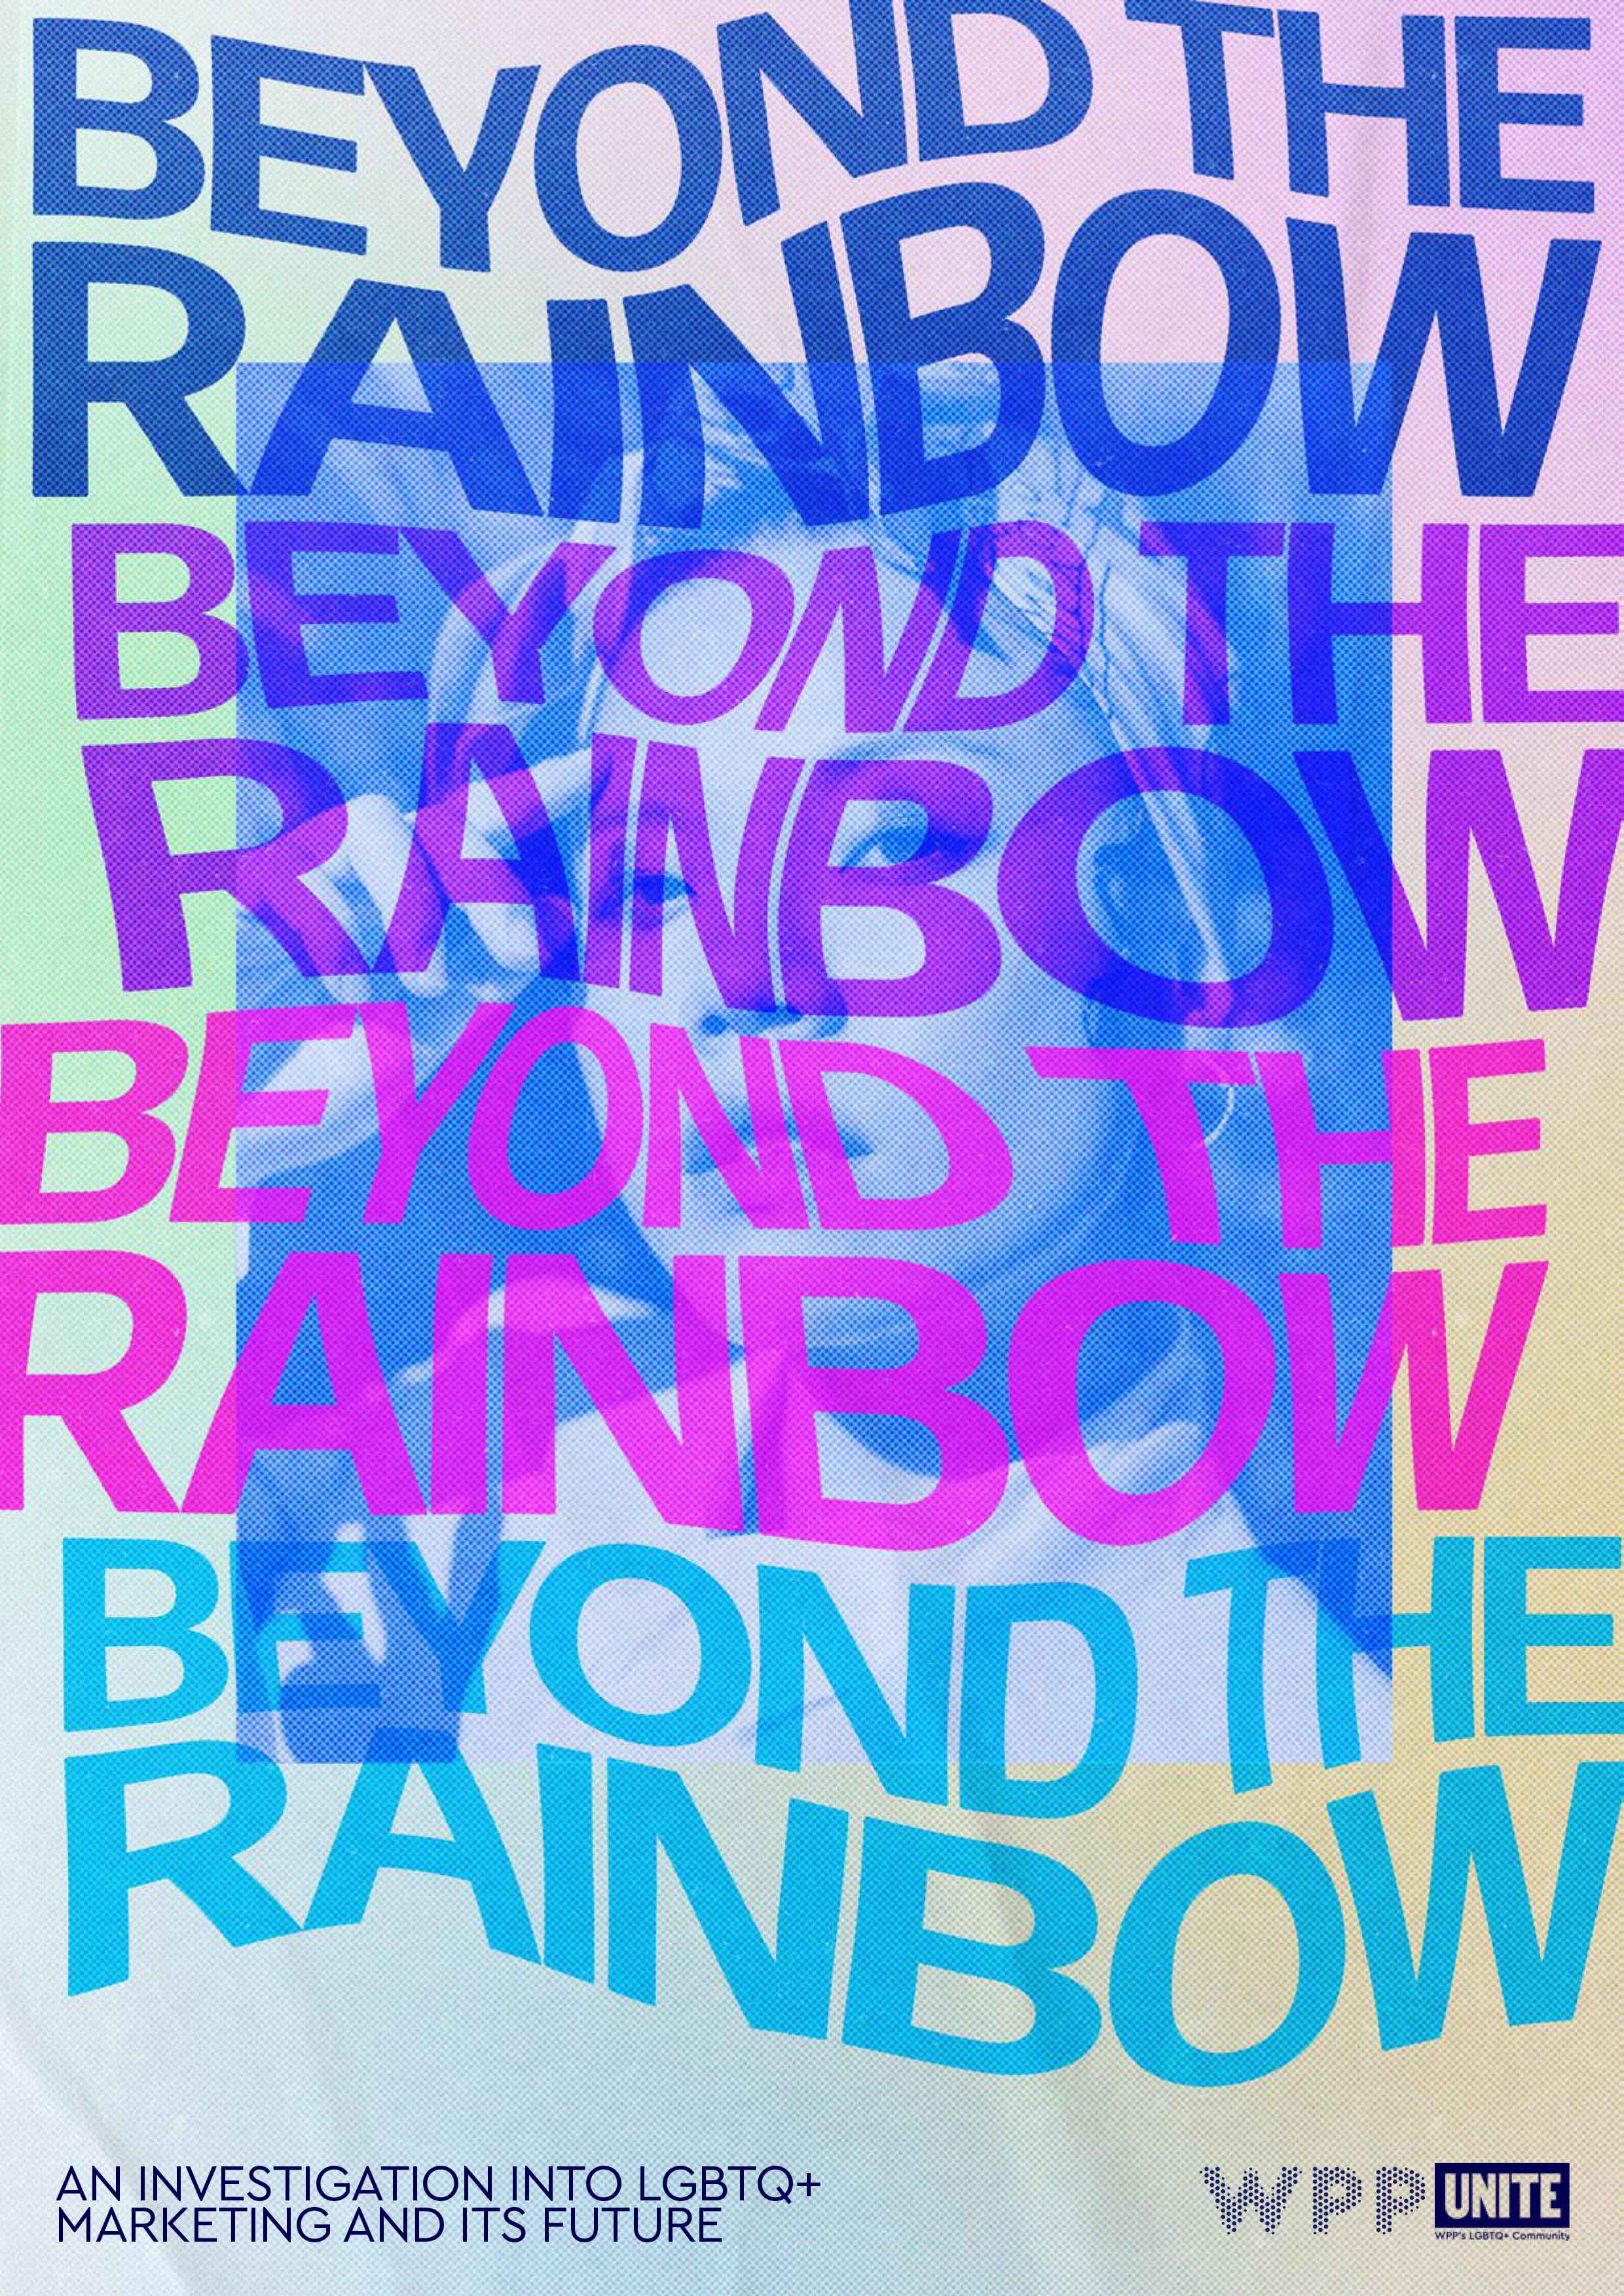 Front cover of the "Beyond the Rainbow" report